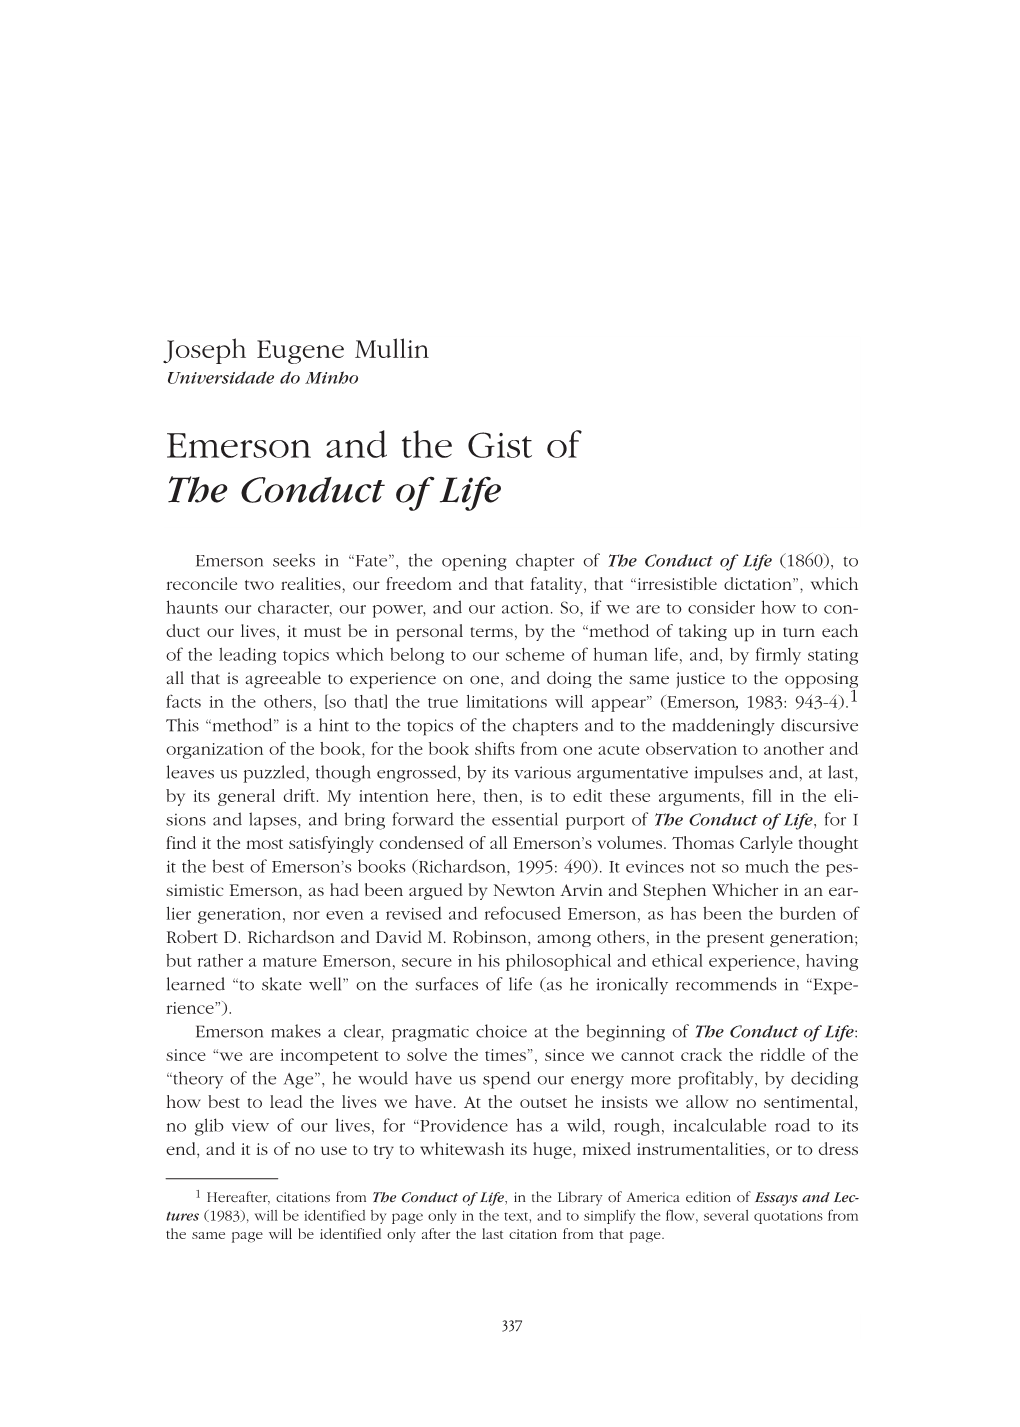 Emerson and the Gist of the Conduct of Life